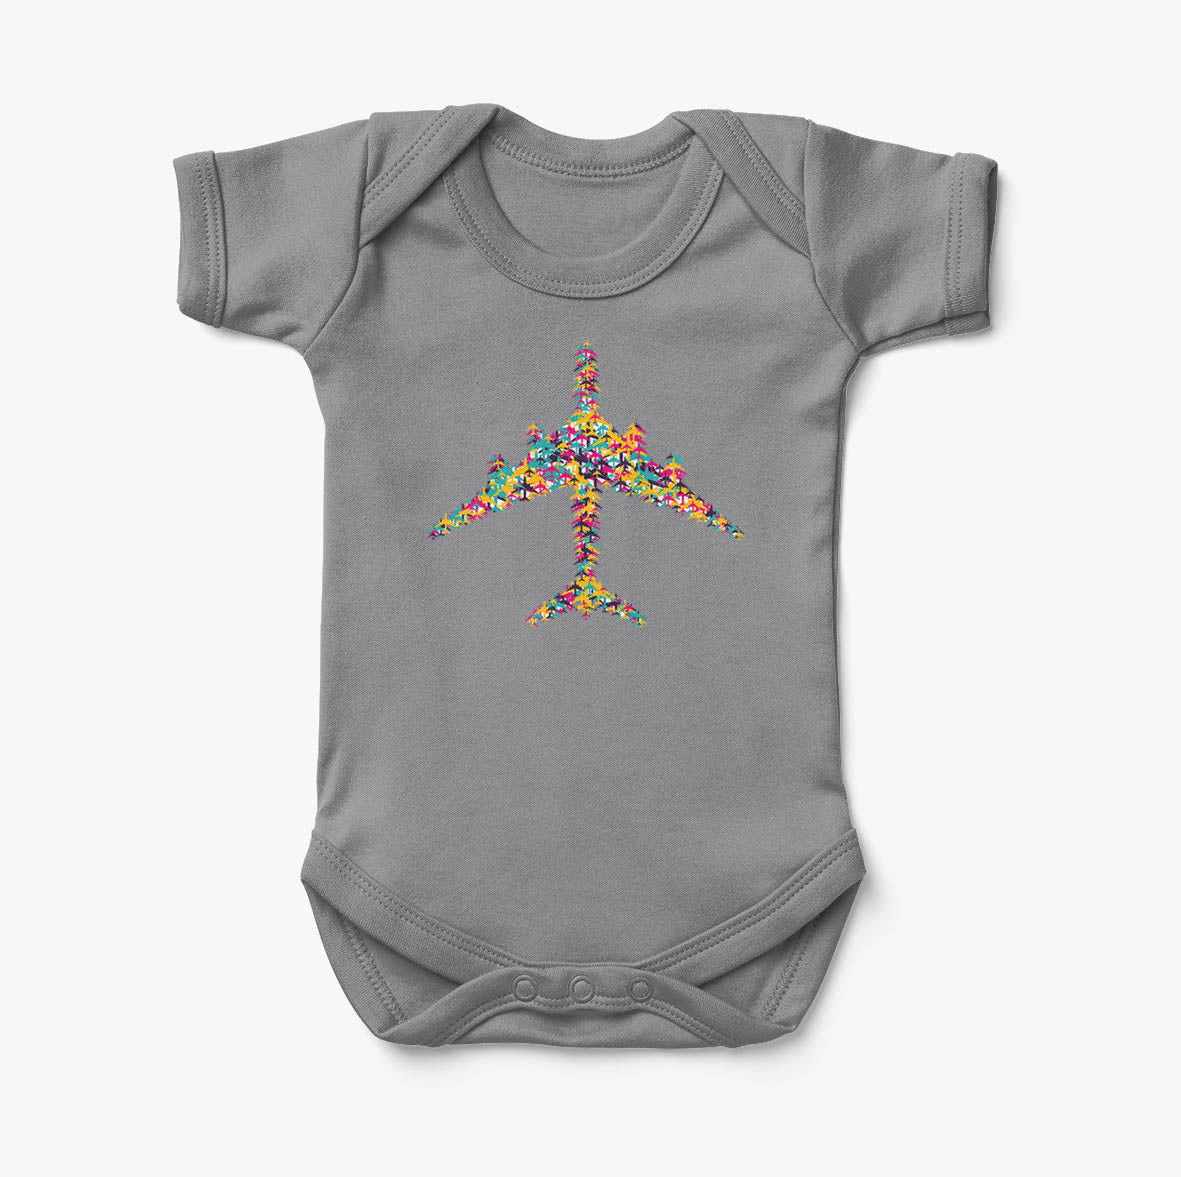 Colourful Airplane Designed Baby Bodysuits